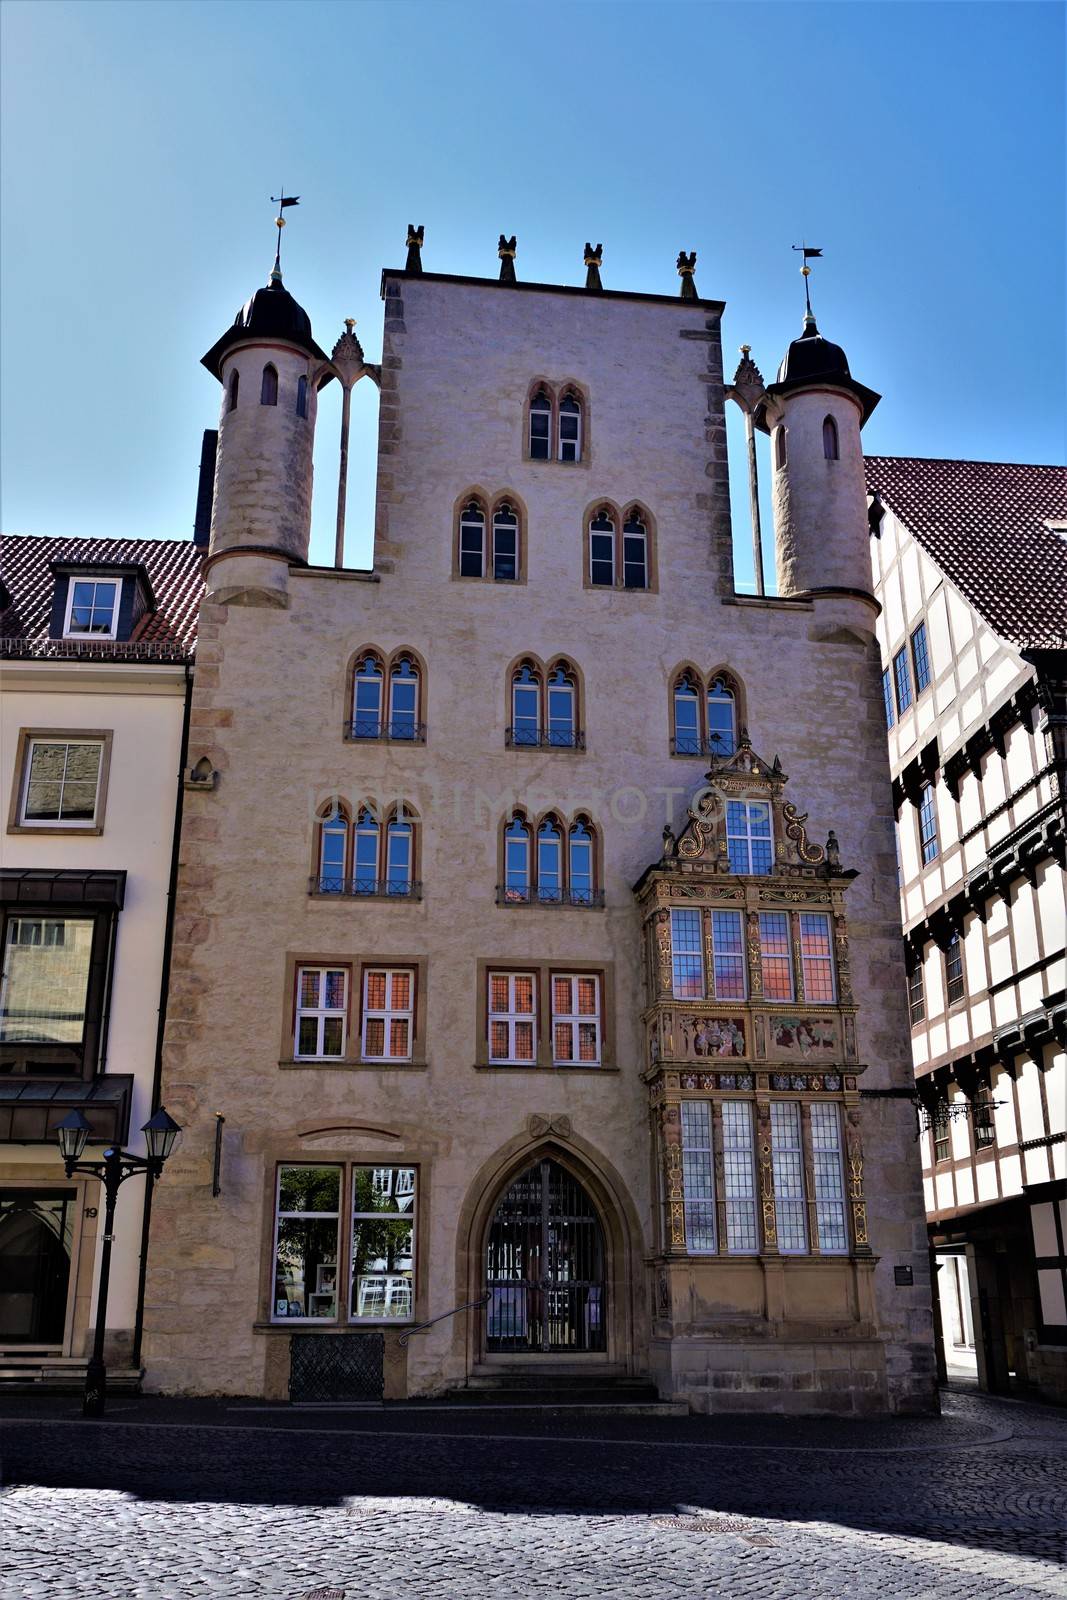 Beautiful house on the market square in Hildesheim, Germany